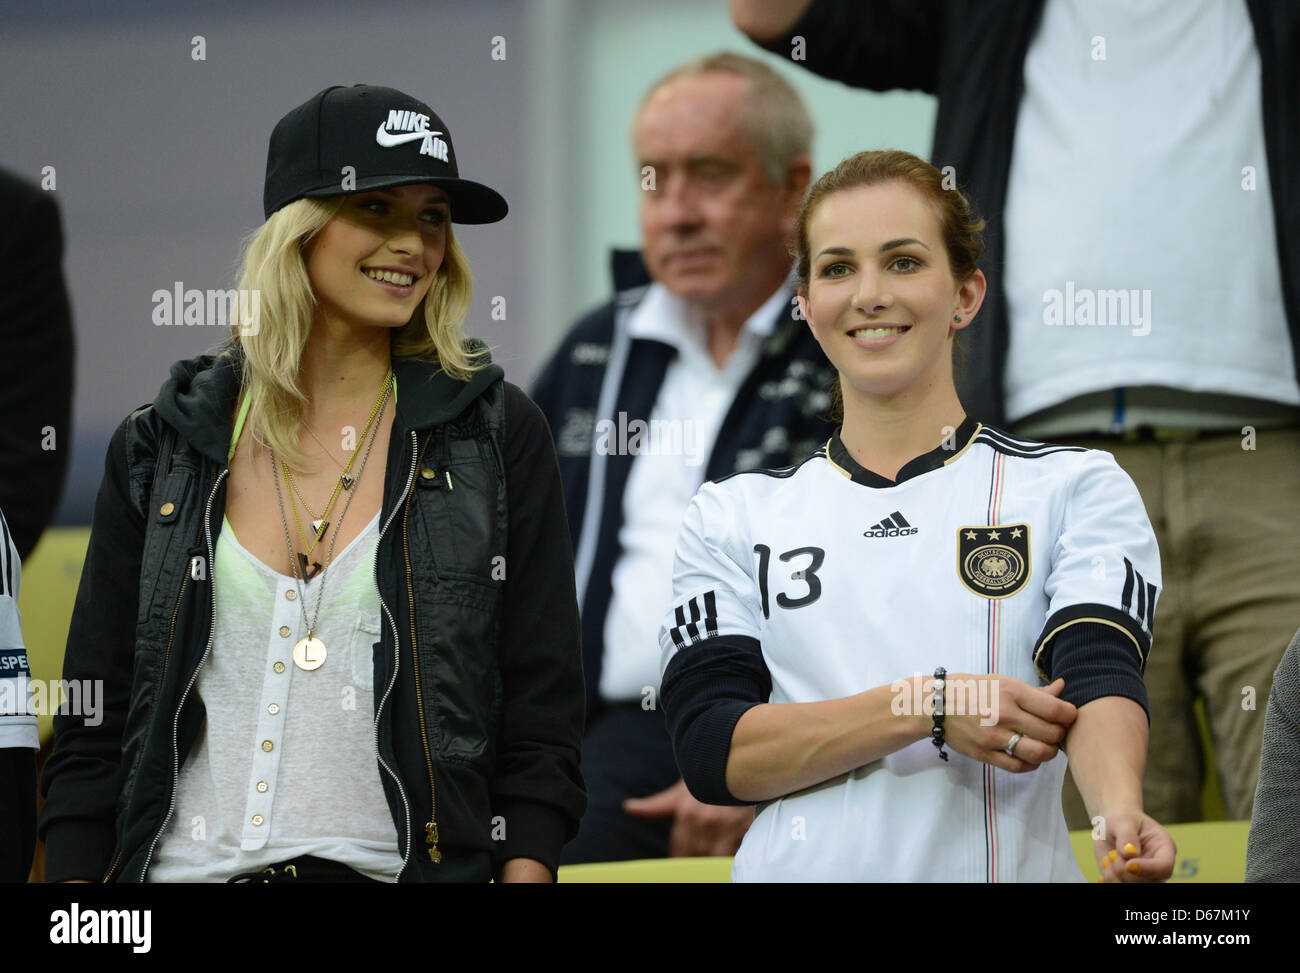 Lena Gercke, the girlfriend of Sami Khedira and Lisa Mueller, the wife of  Thomas Mueller, on the stand prior to the UEFA EURO 2012 quarter-final  soccer match Germany vs Greece at Arena